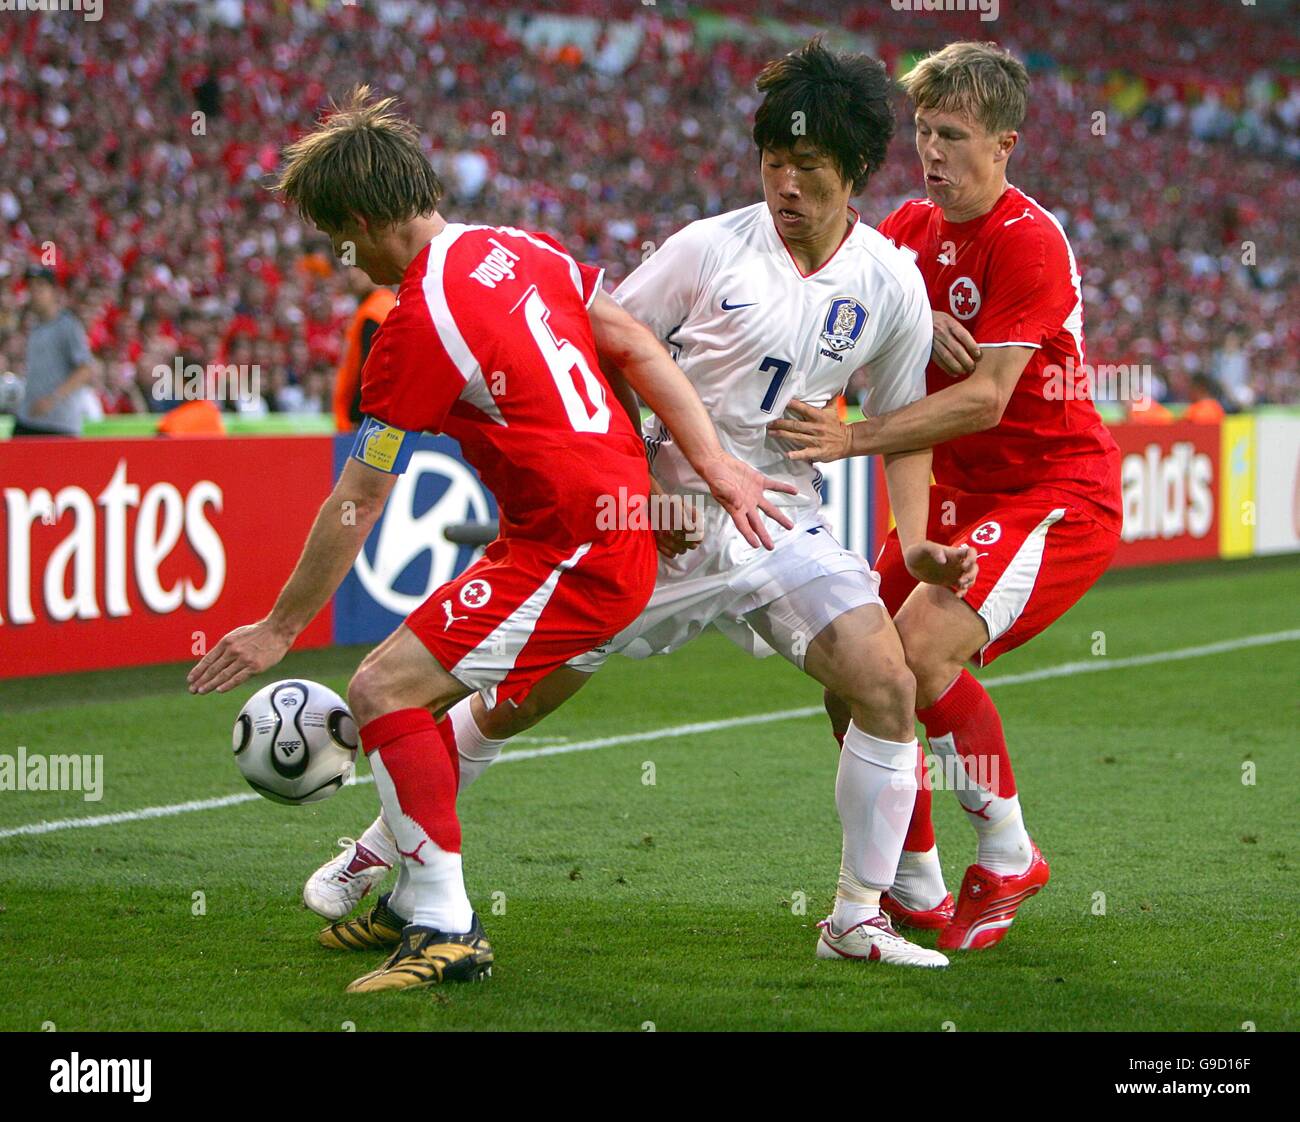 Soccer - 2006 FIFA World Cup Germany - Group G - Switzerland v South Korea - AWD Arena. South Korea's Ji-Sung Park (c) is put under pressure by Switzerland's Johann Vogel (l) and Christoph Spycher (r) Stock Photo